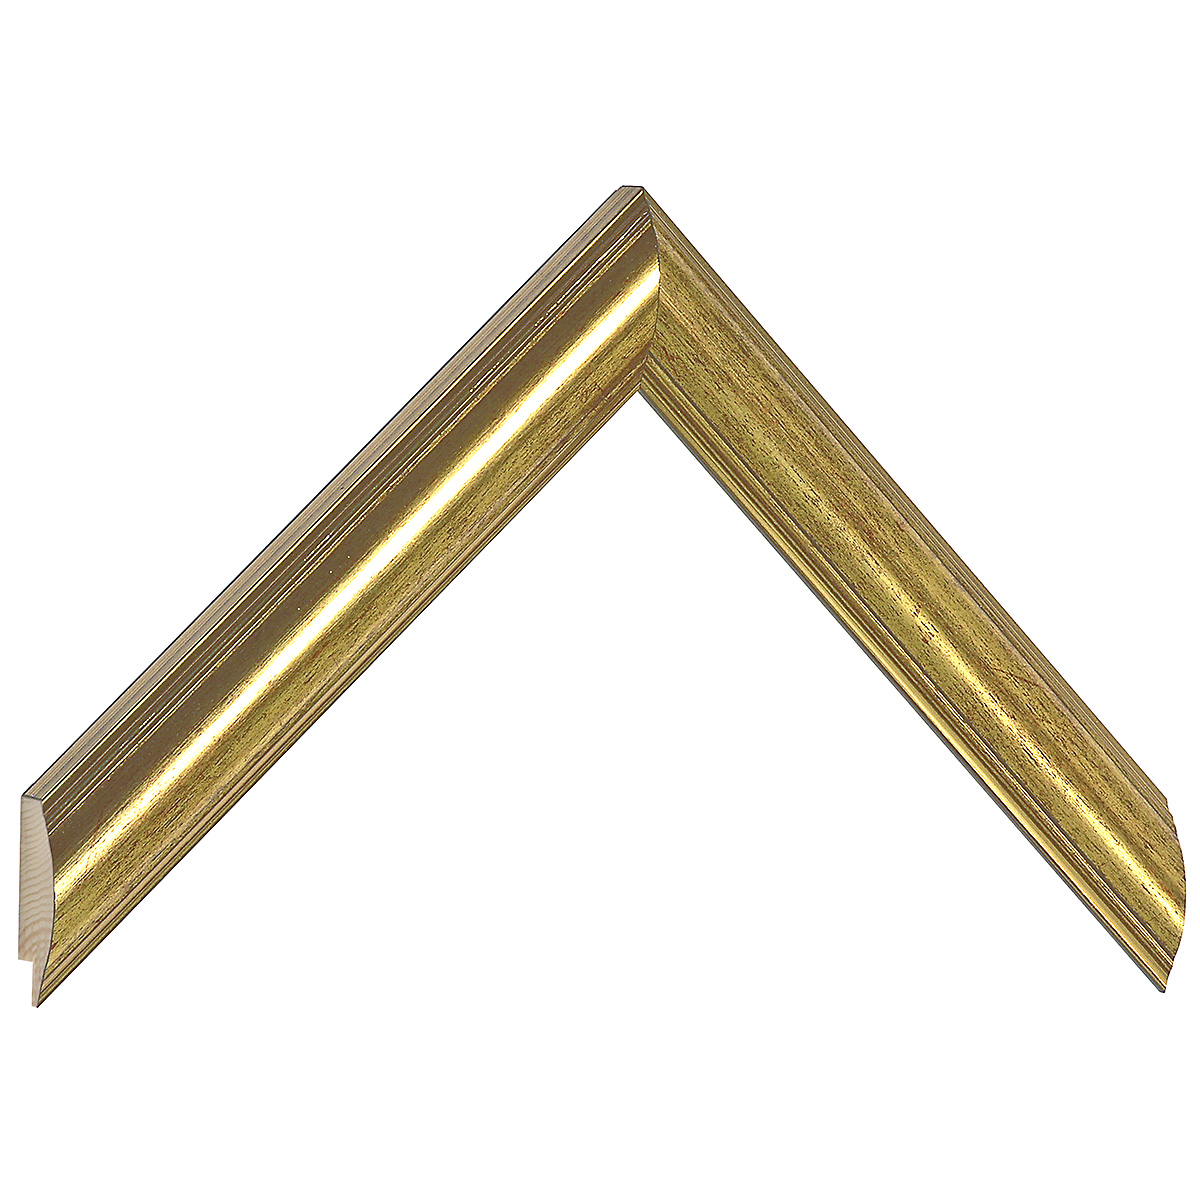 Moulding finger-jointed pine - Width 25mm Height 19 - Gold - Sample